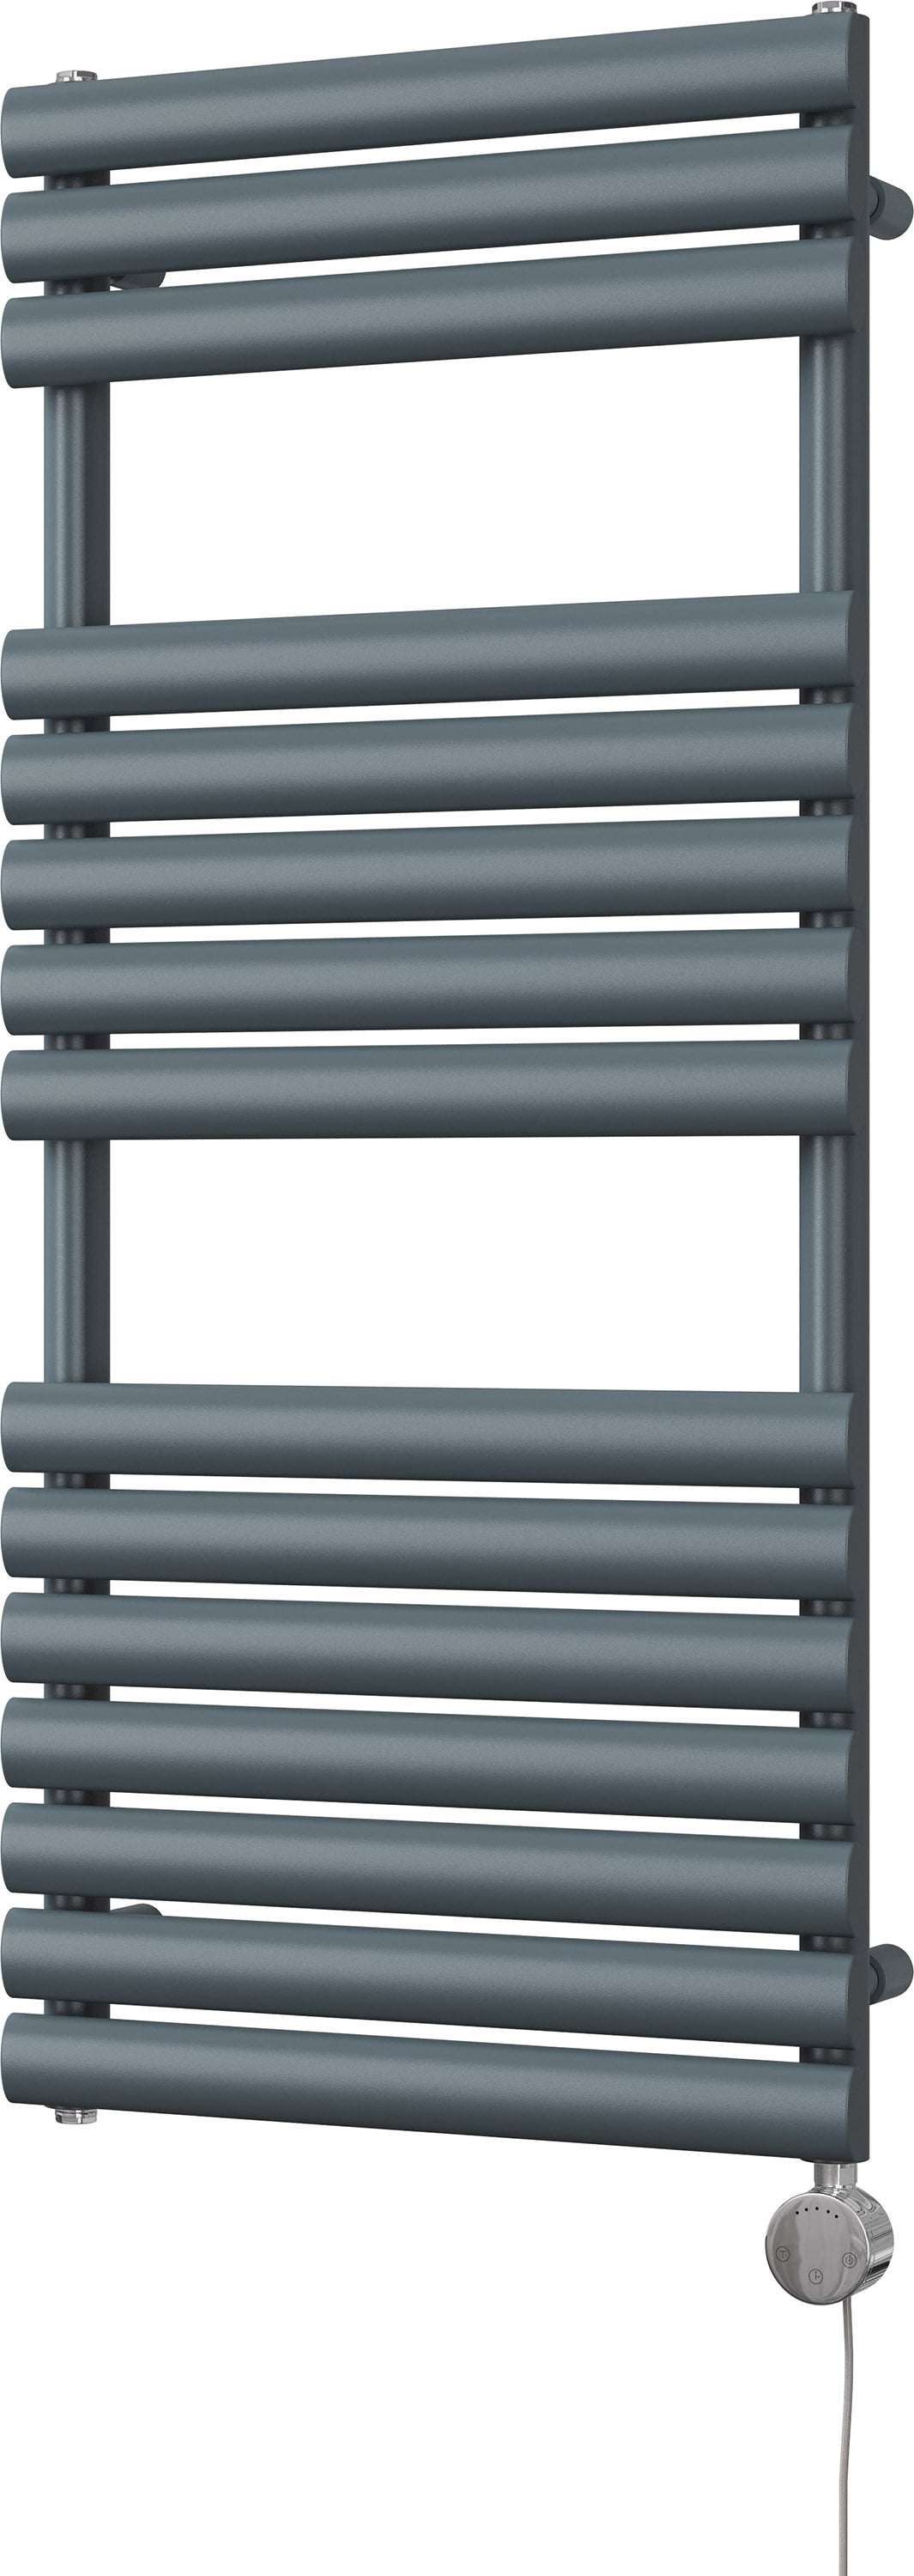 Omeara - Anthracite Electric Towel Rail H1120mm x W500mm 300w Thermostatic